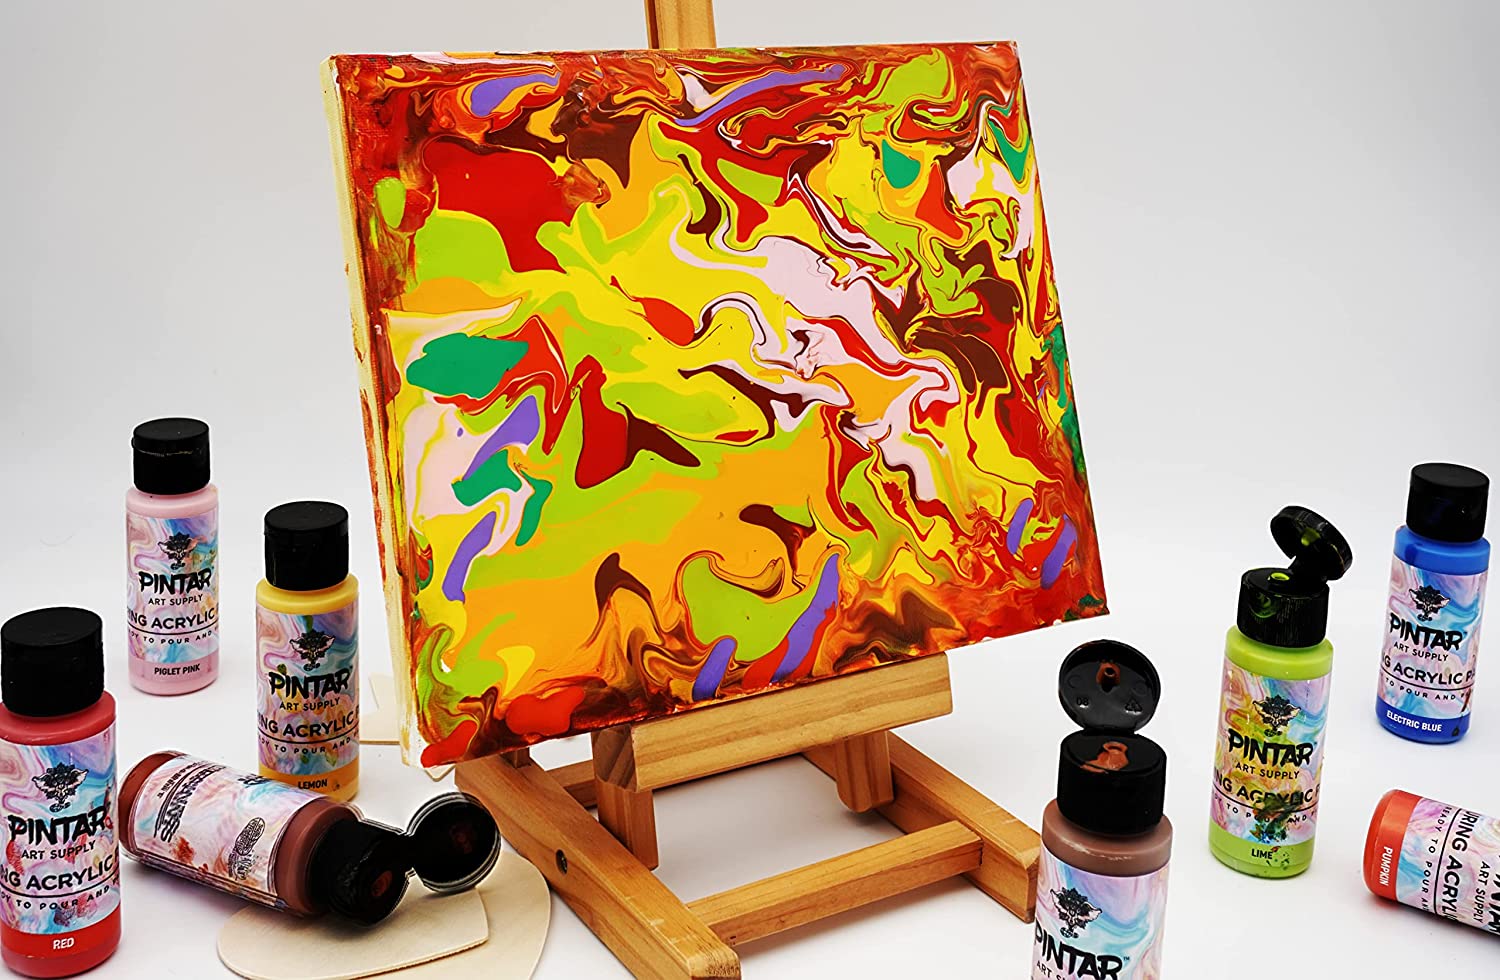 Acrylic Pouring Paint –